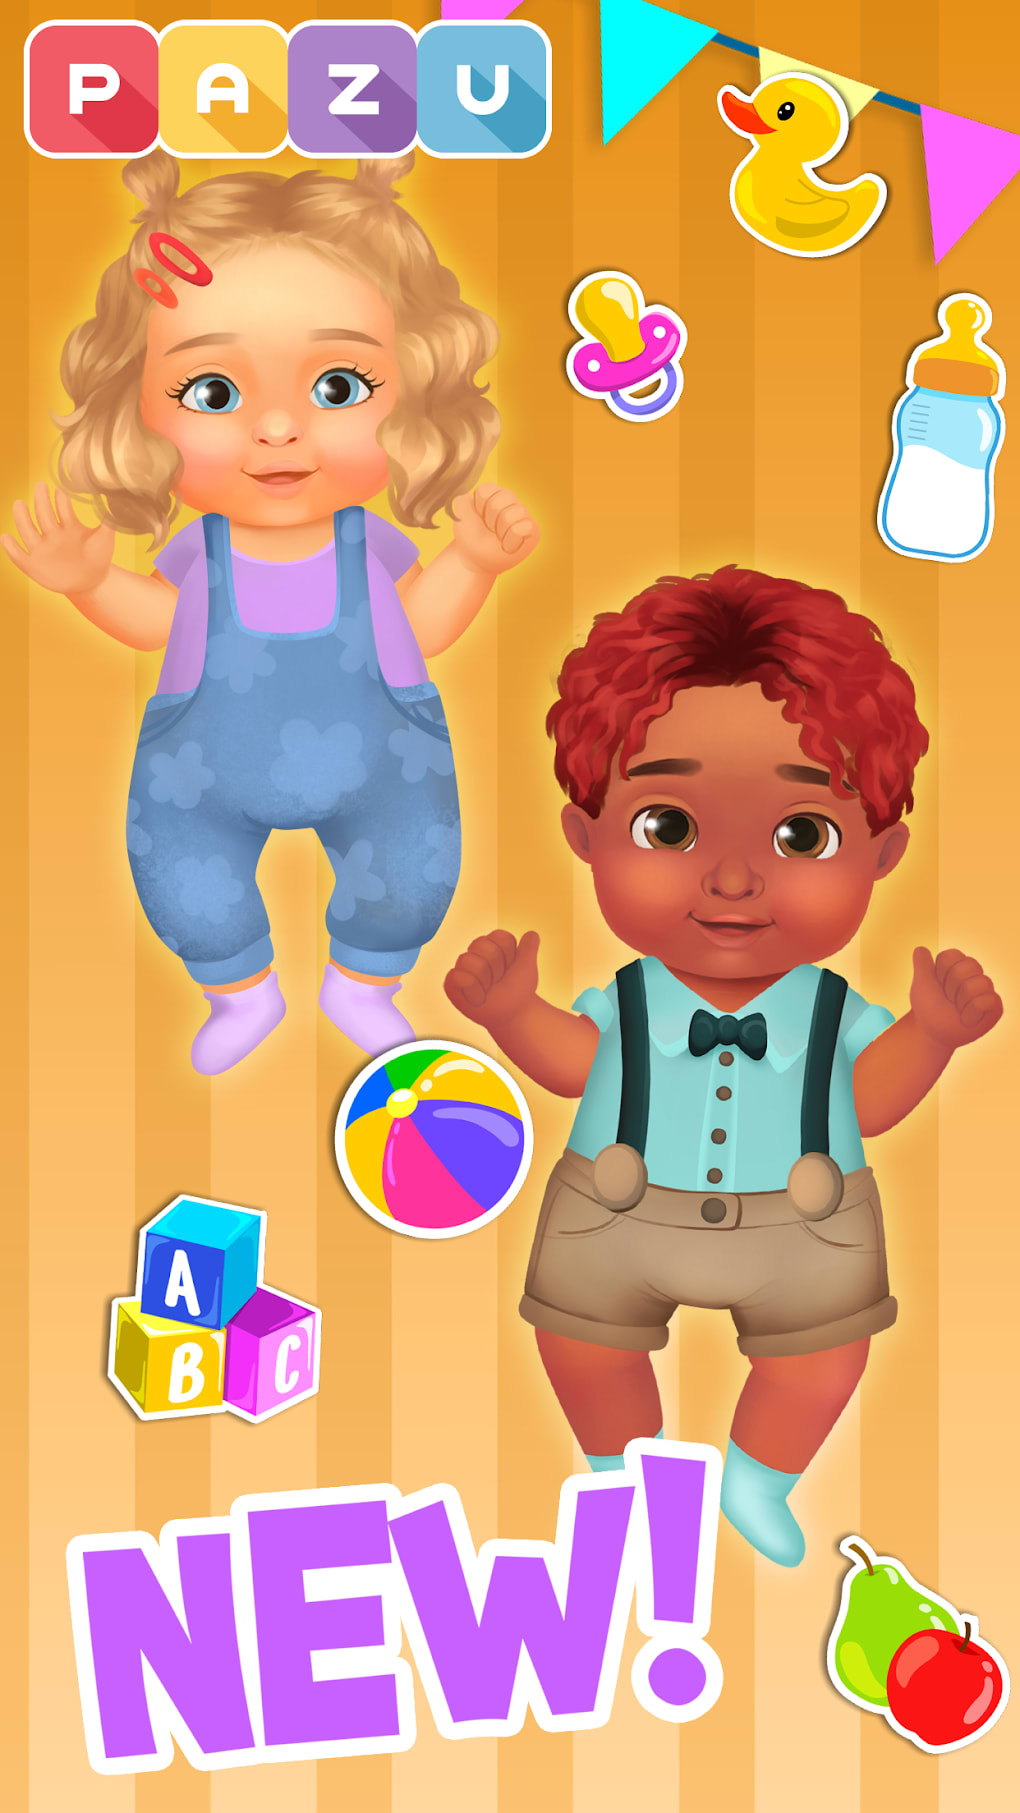 Baby Dress Up - Best Game For Kids and Girls APK for Android Download